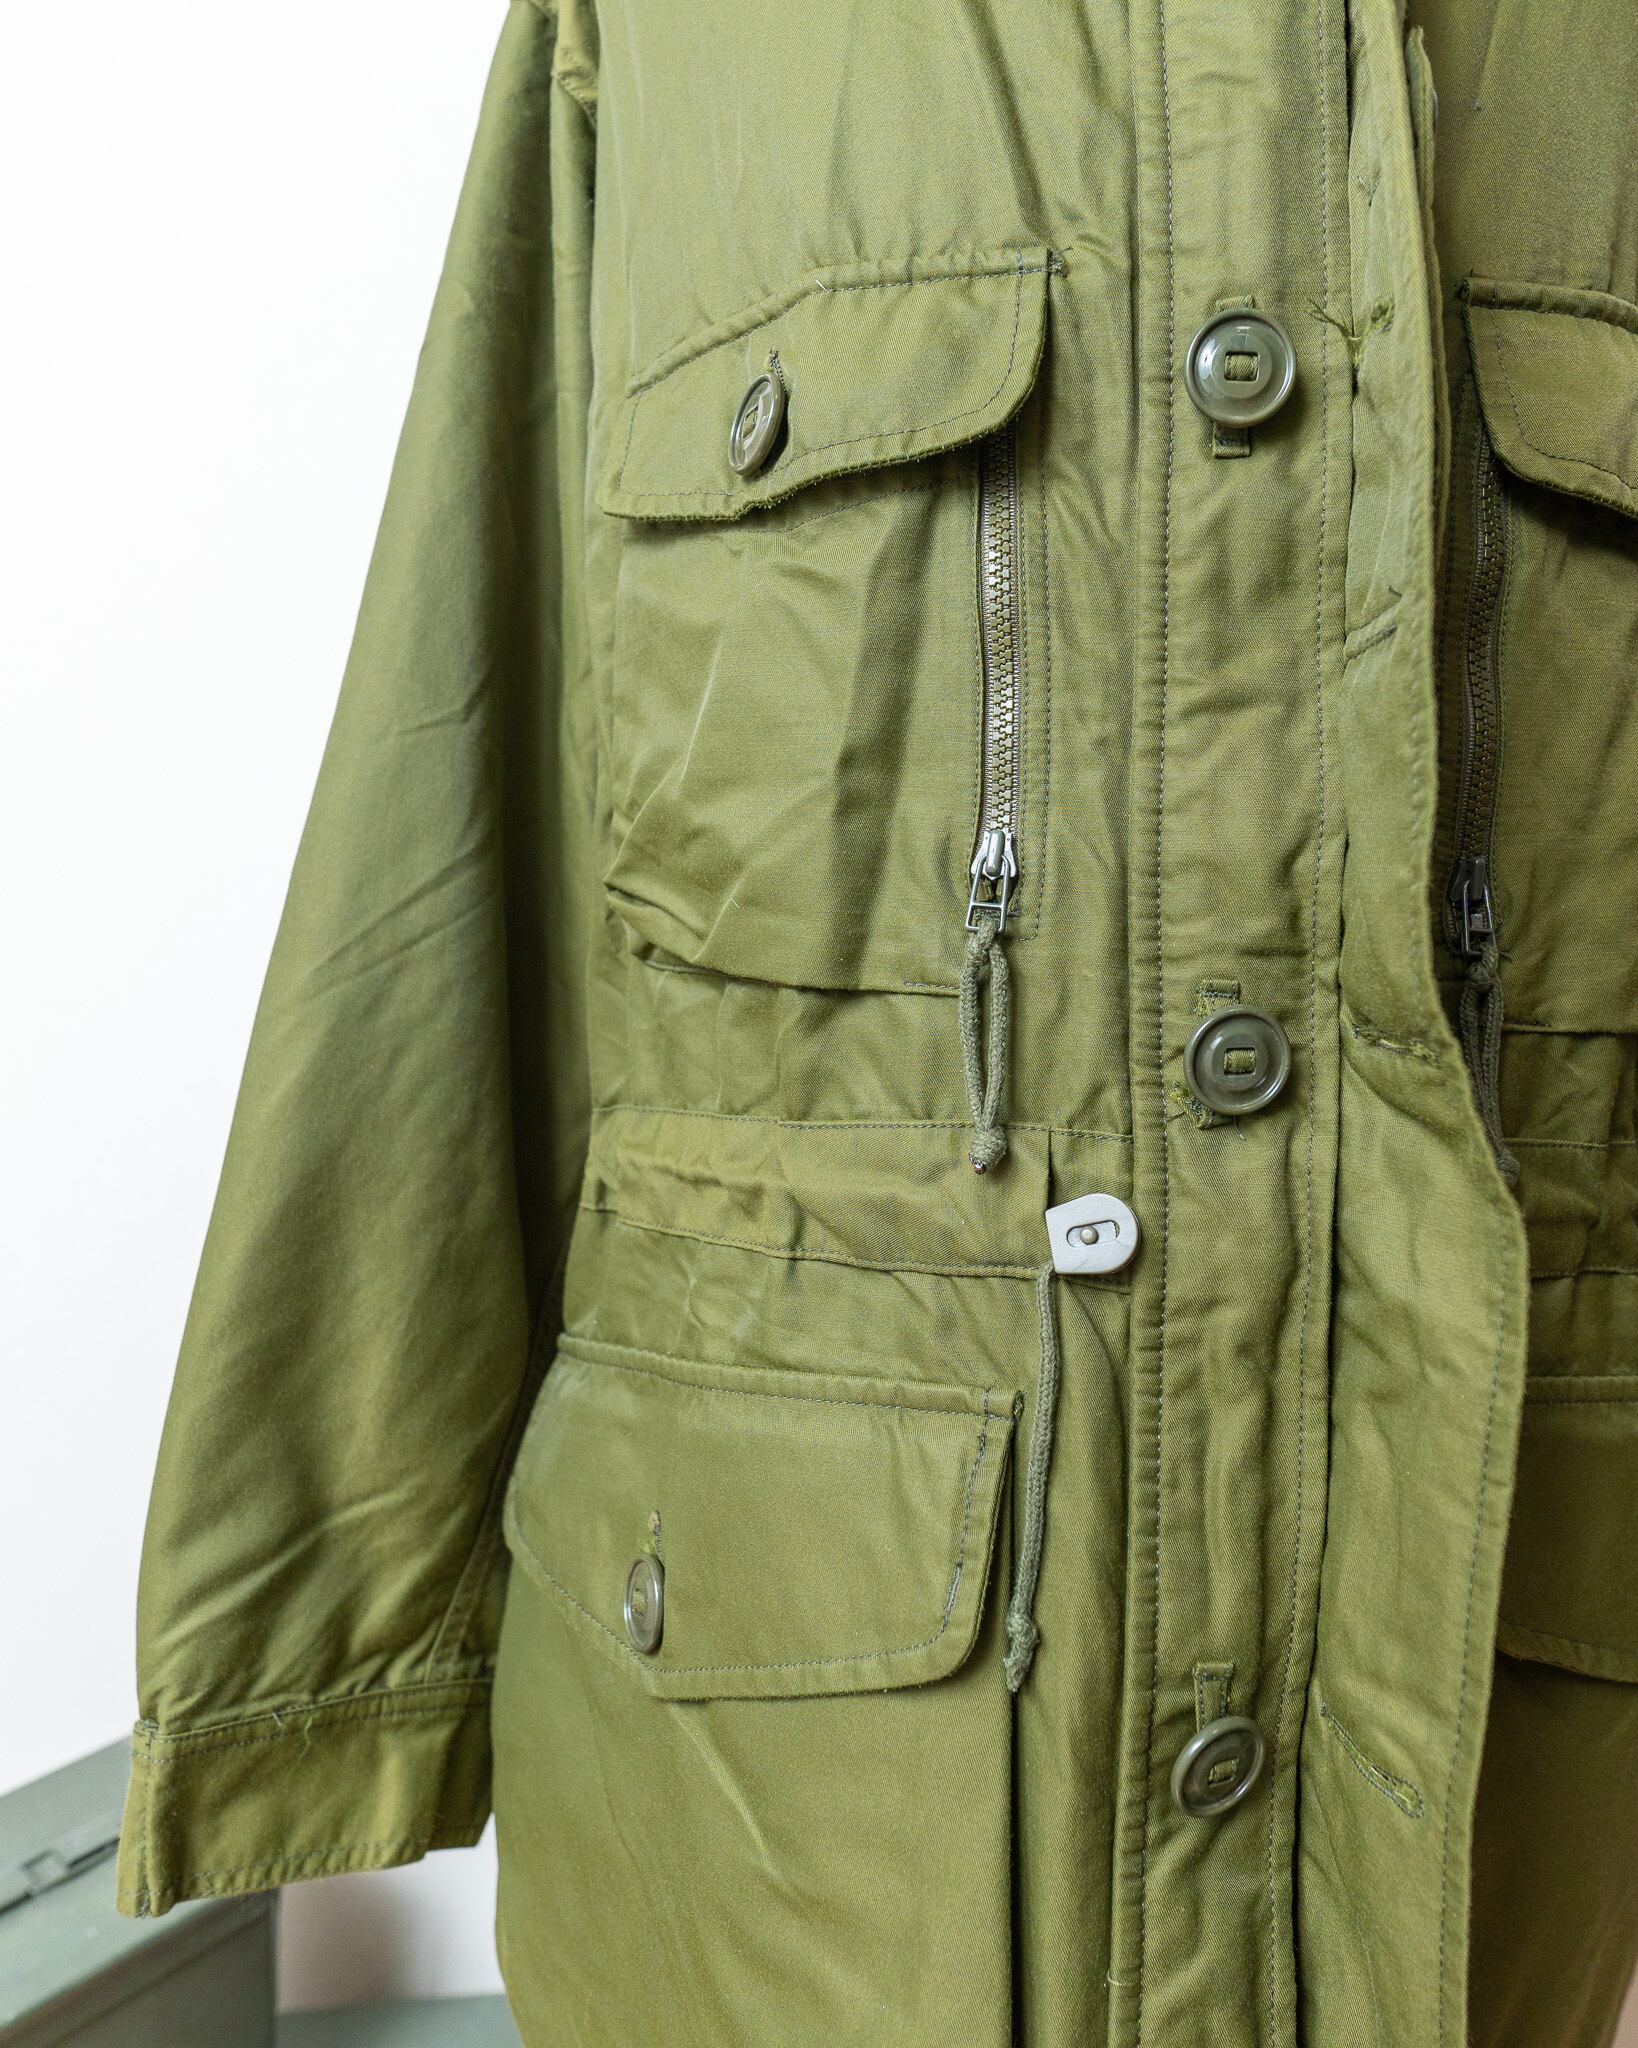 【USED】Canadian Army ECW Combat Parka 実物 後期型 カナダ軍 コンバット パーカー 希少 レア | FAR  EAST SIGNAL powered by BASE